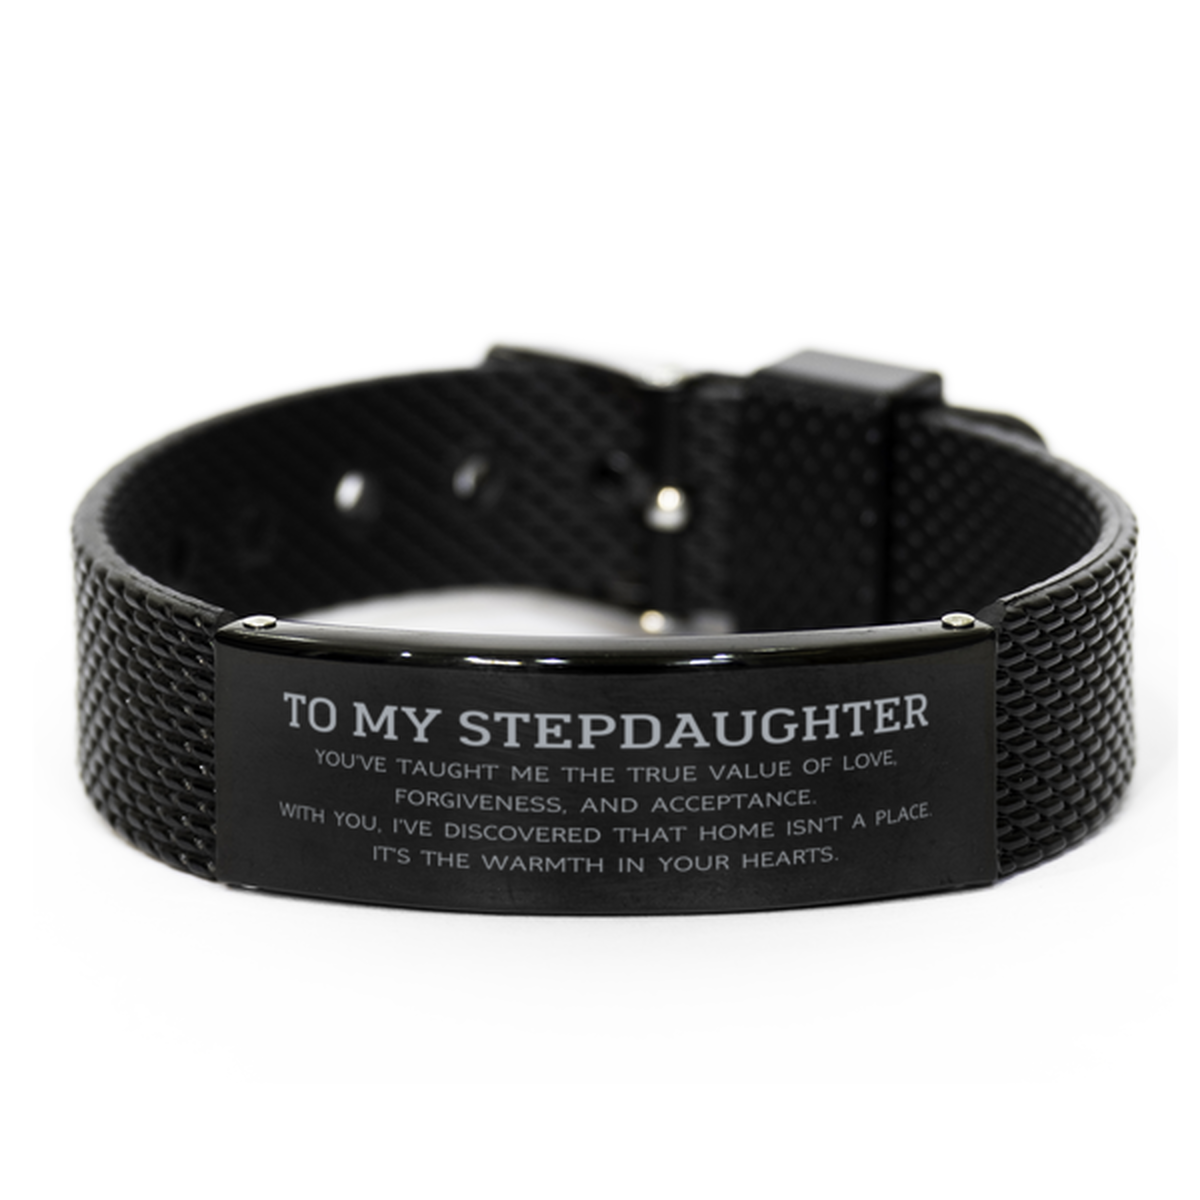 To My Stepdaughter Gifts, You've taught me the true value of love, Thank You Gifts For Stepdaughter, Birthday Black Shark Mesh Bracelet For Stepdaughter